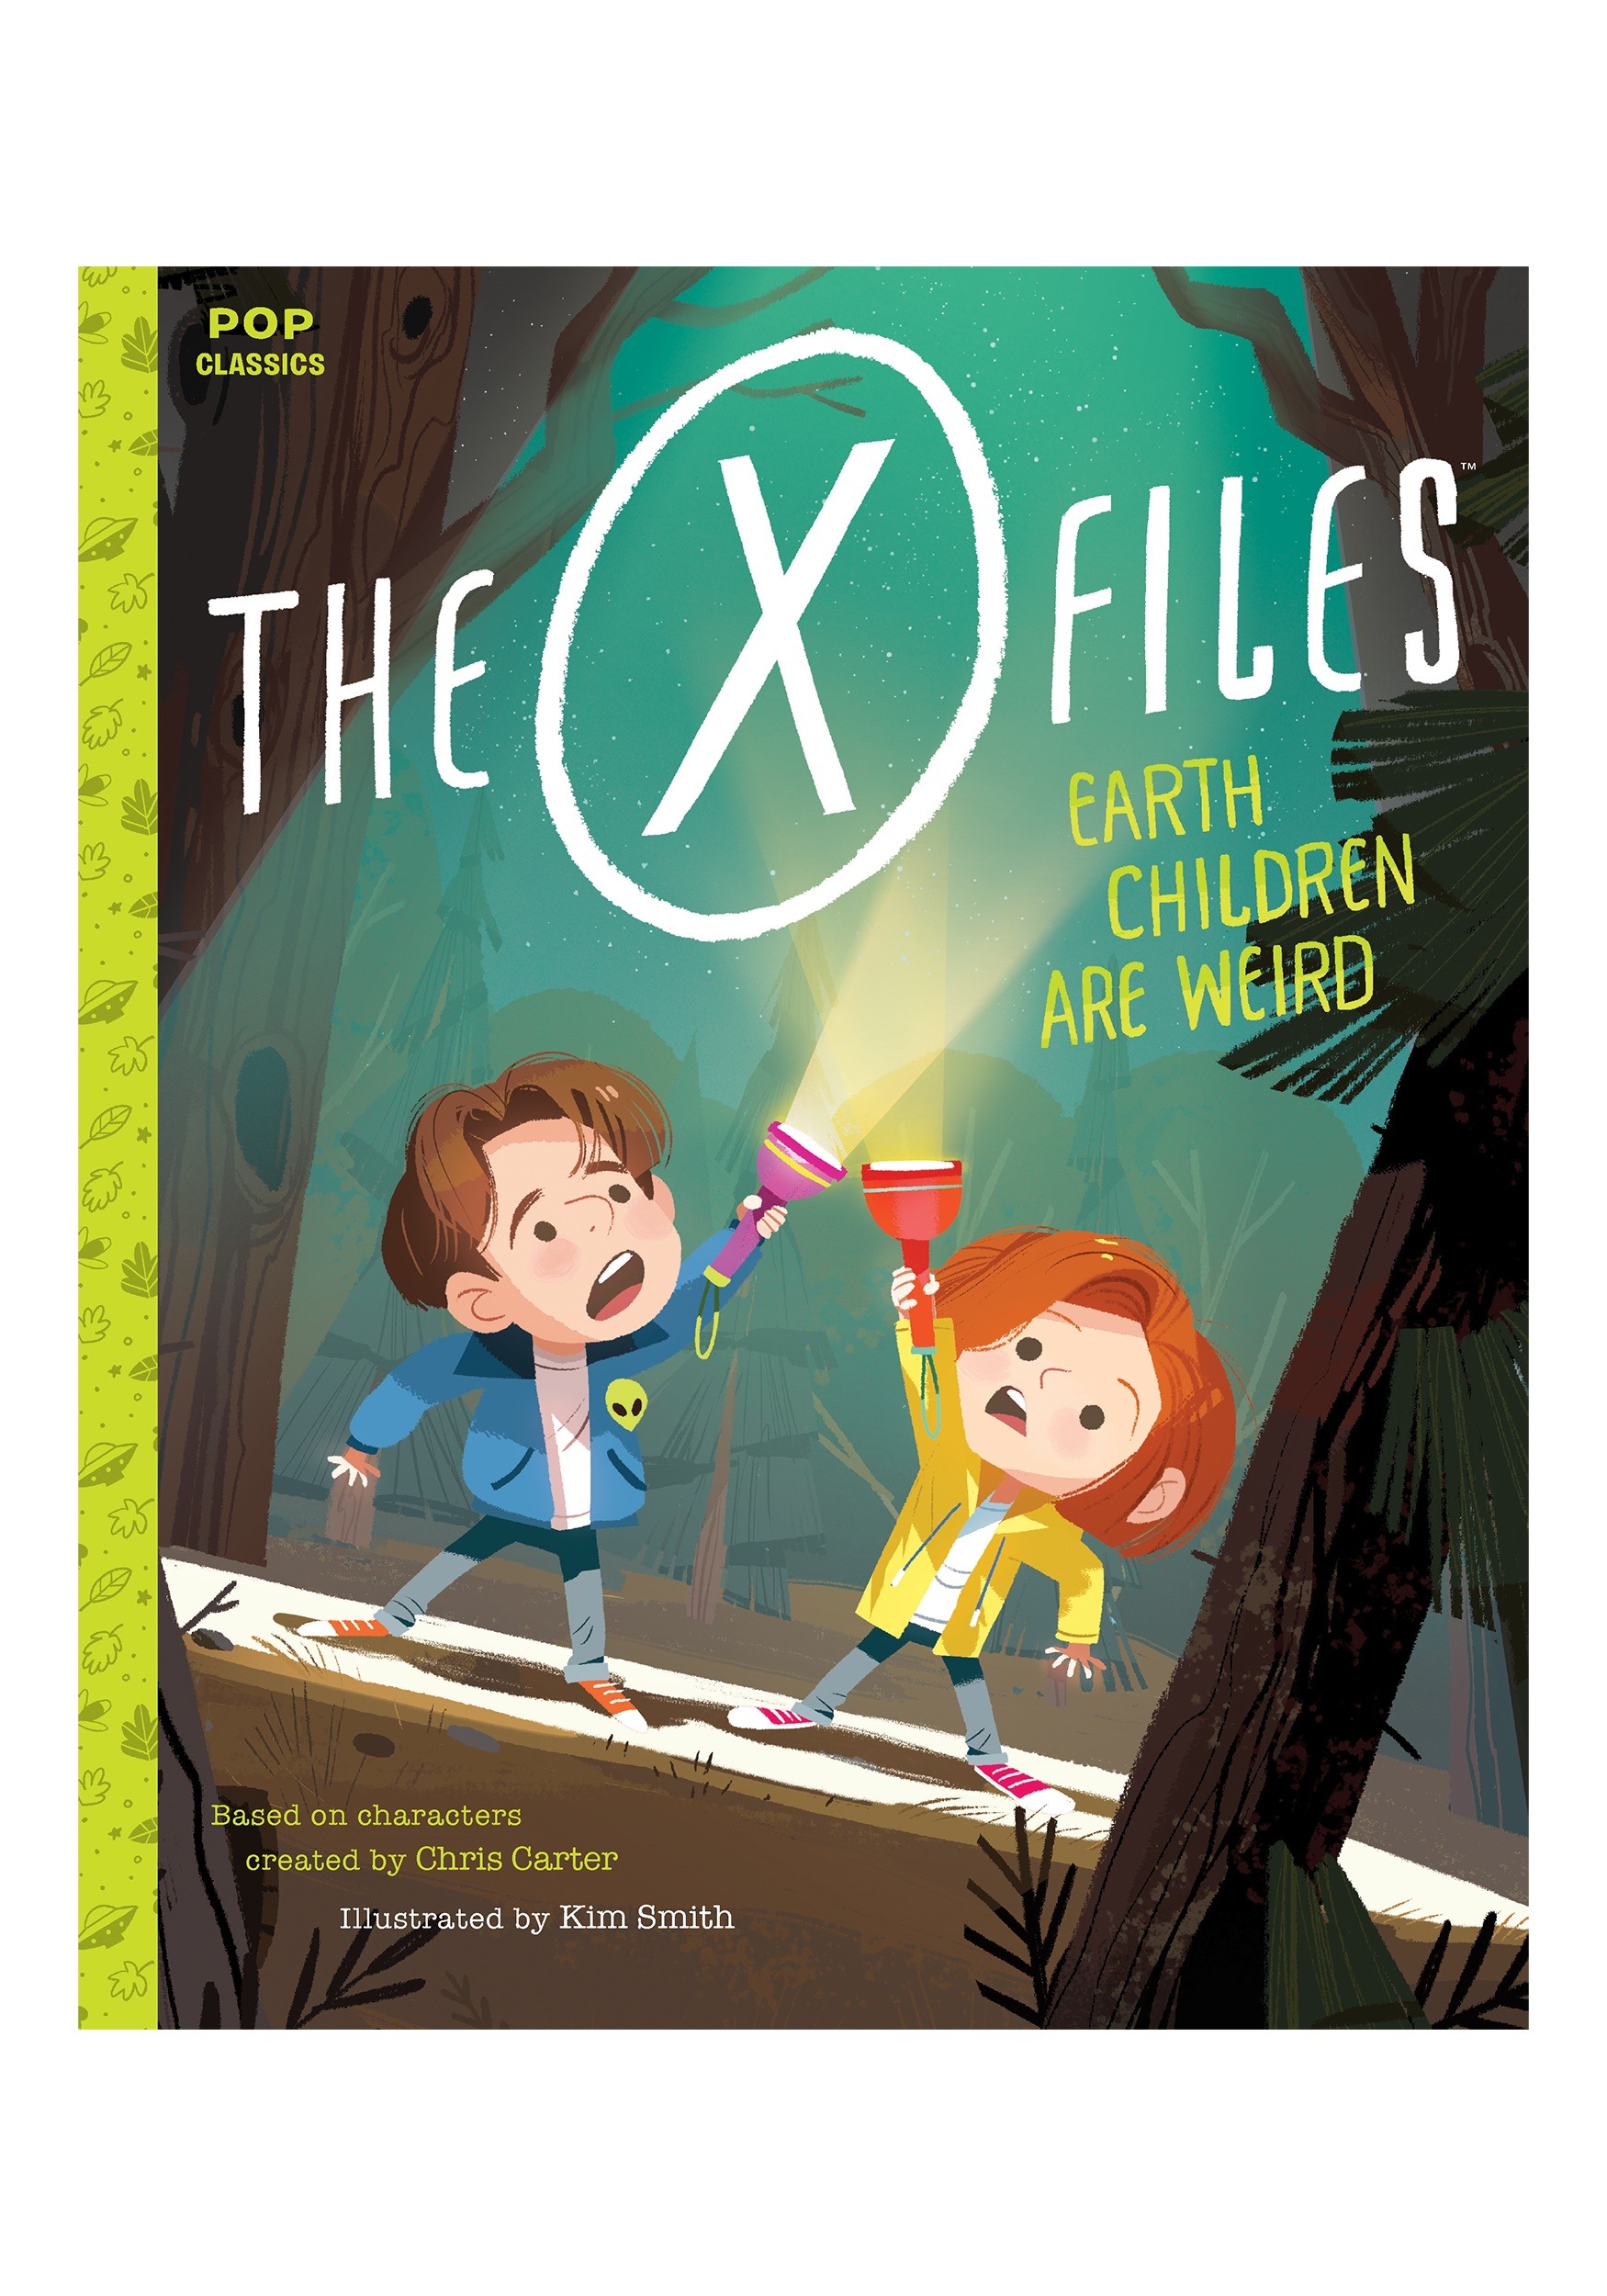 The X-Files: Earth Children Are Weird Storybook